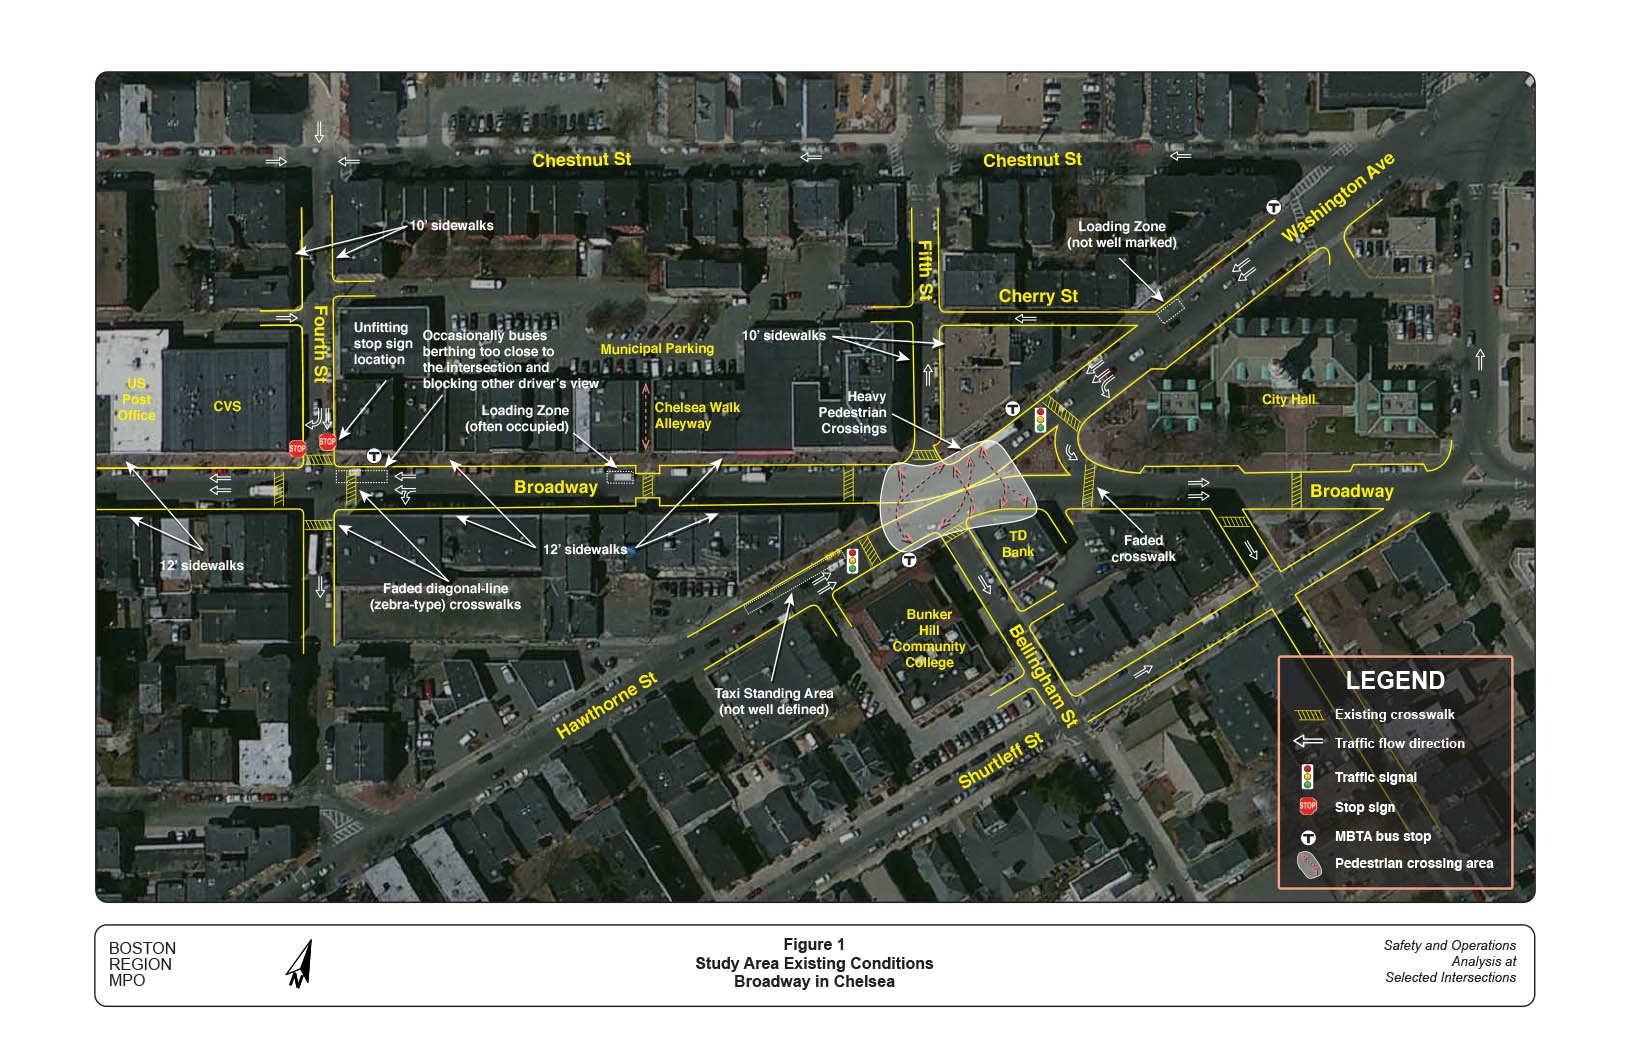 Figure 1 — Study Area Existing Conditions
Aerial view of study area with computer-drawn superimposed street and traffic map that shows: existing crosswalk, traffic flow direction, traffic signal, stop sign, MBTA bus stop, and pedestrian crossing area.
